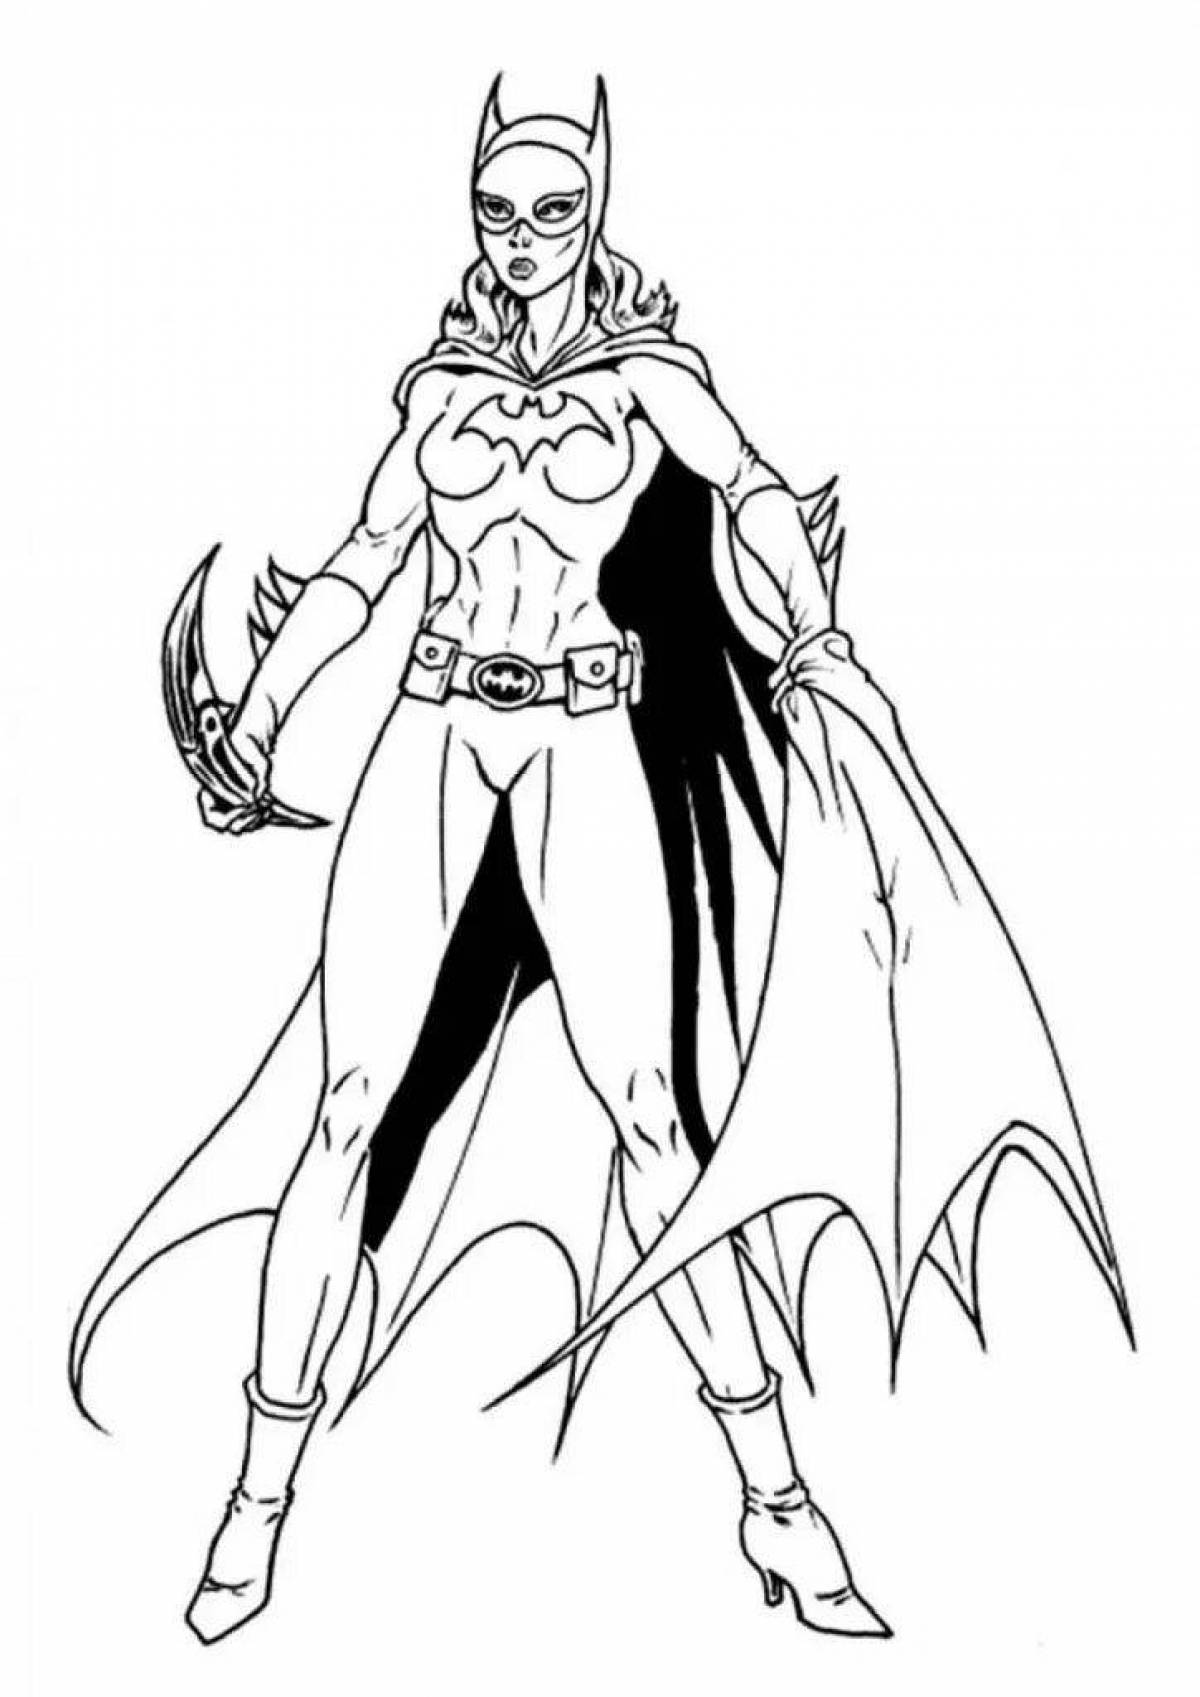 Animated catwoman coloring page